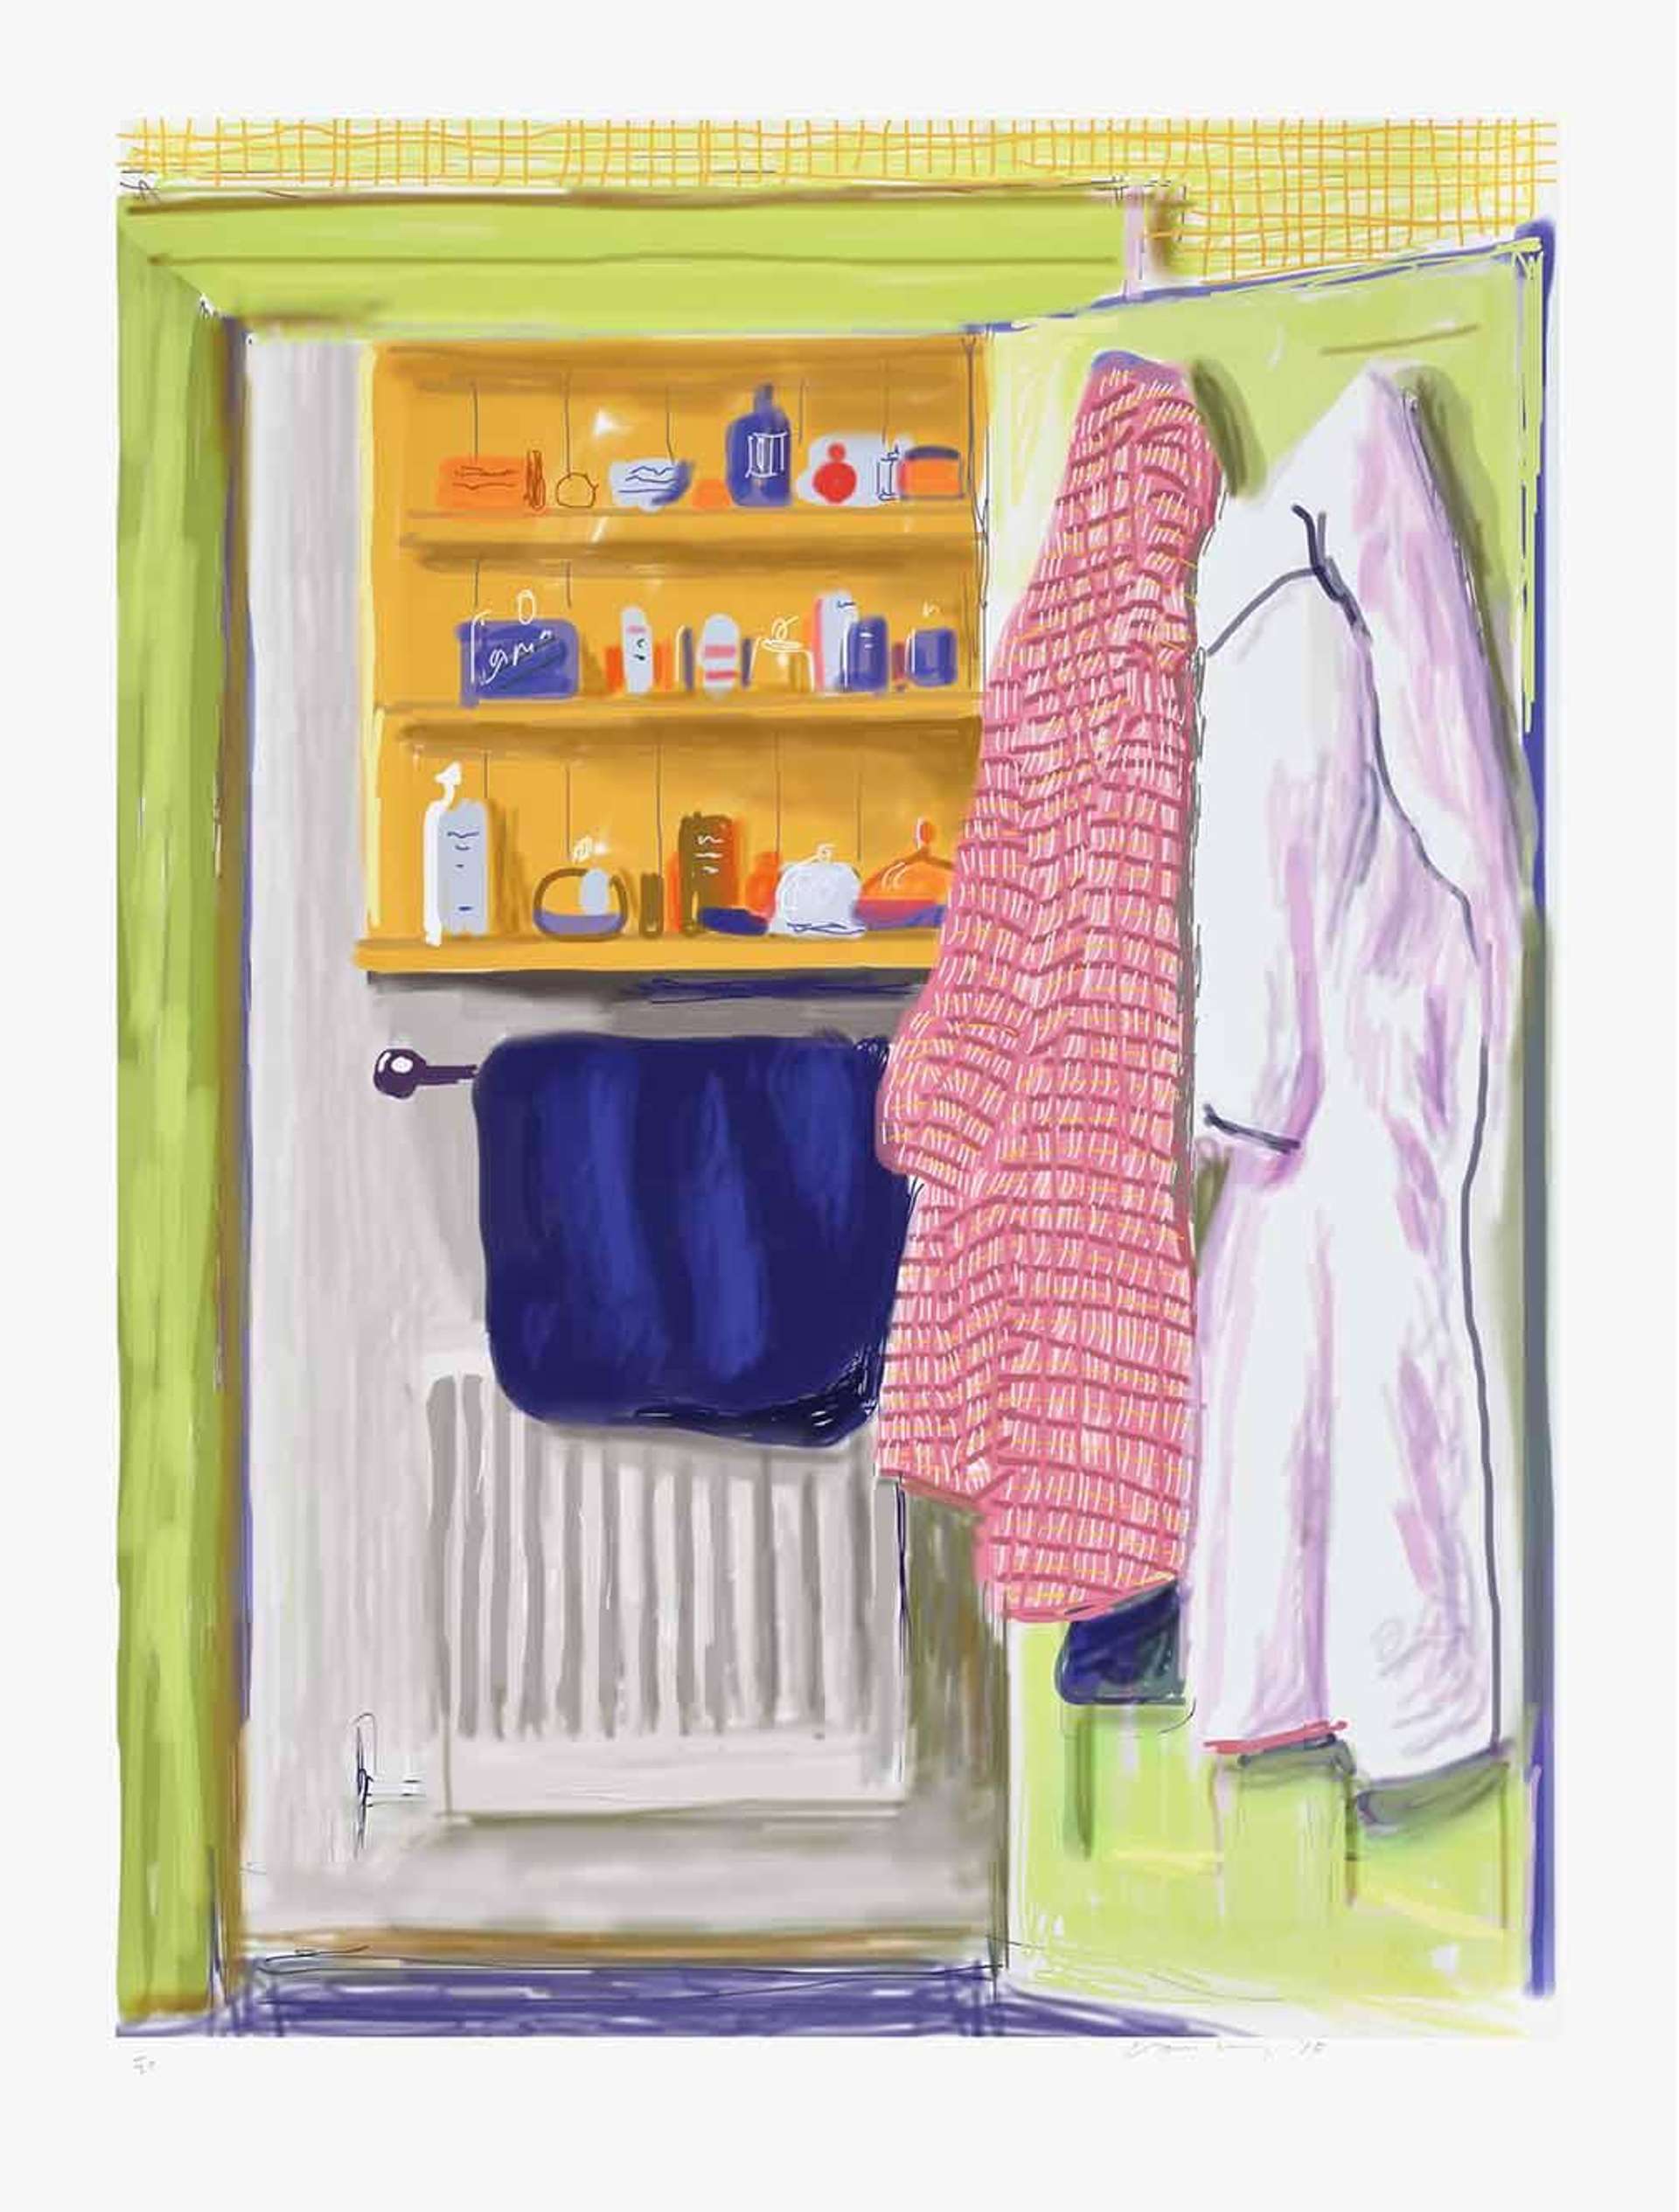 David Hockney’s Untitled No.557. A digital print of a bathroom interior with one red and one white robe hanging from the door with an exposed medicine cabinet